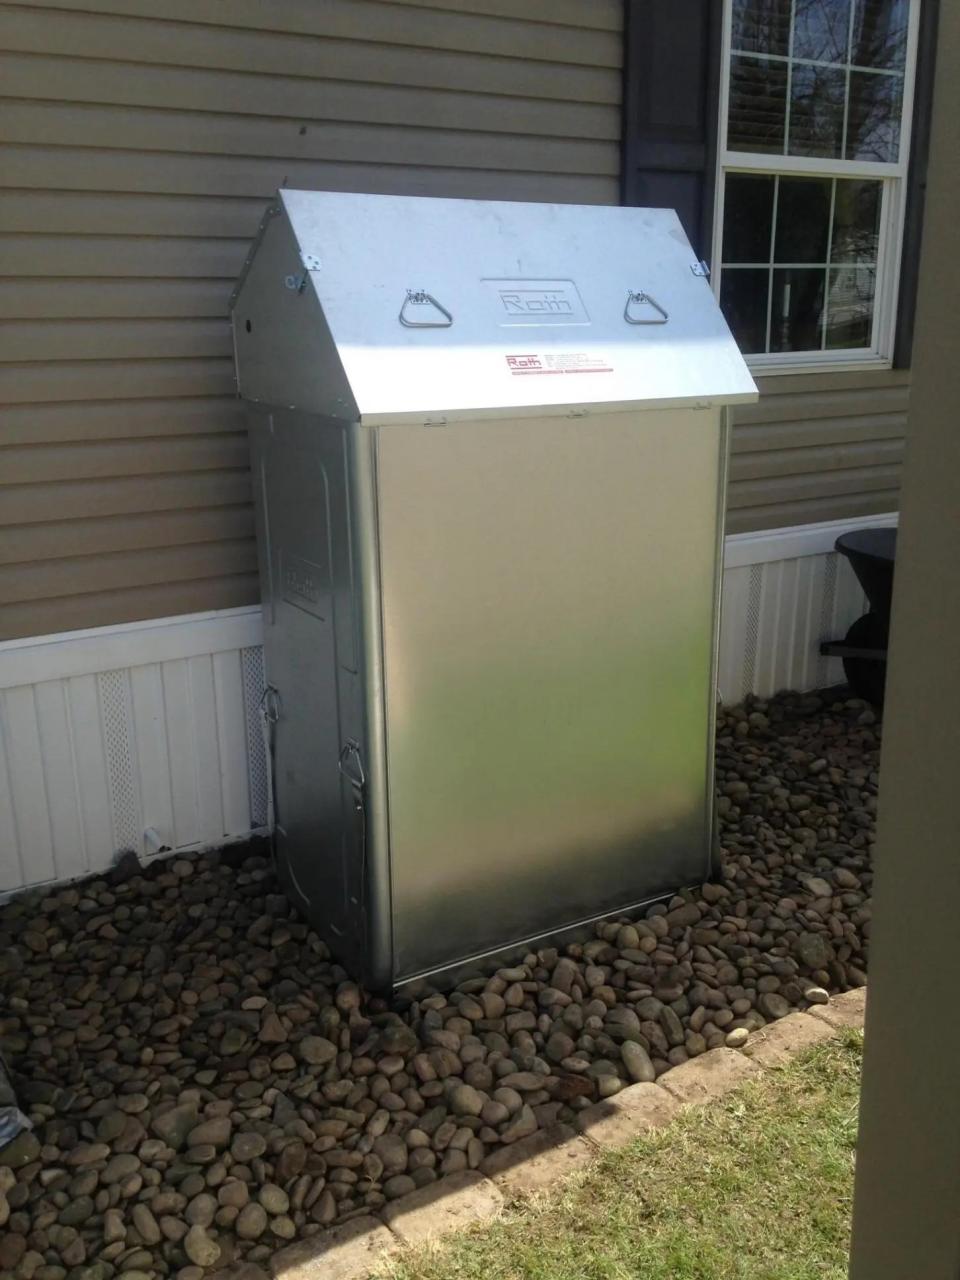 Home Heating Oil Storage Tank Installations Roth North America